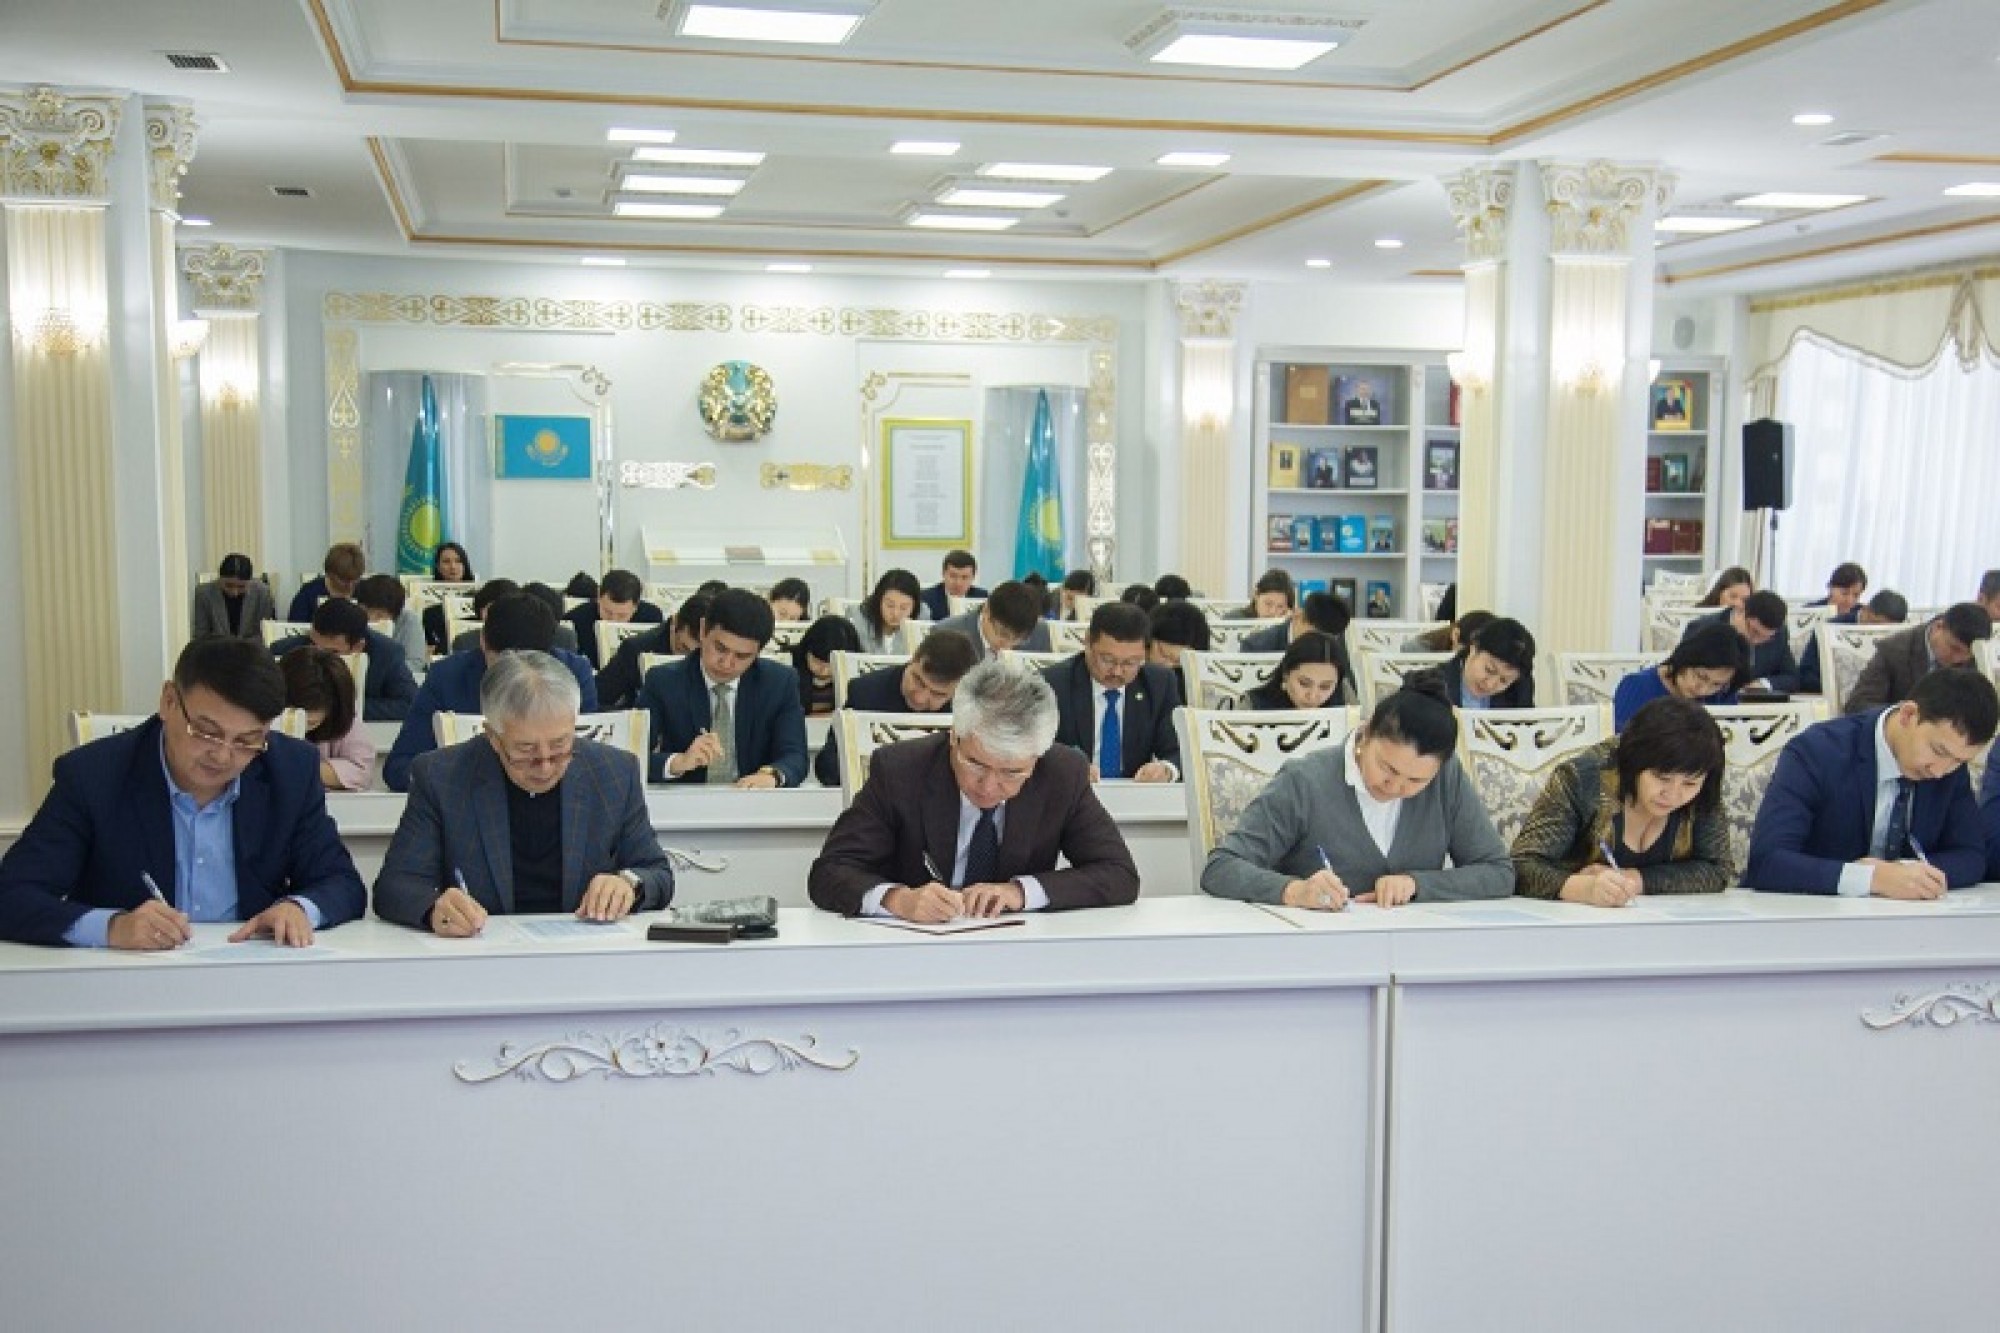 Kazakhstan hosted the first "Public dictation" in Latin